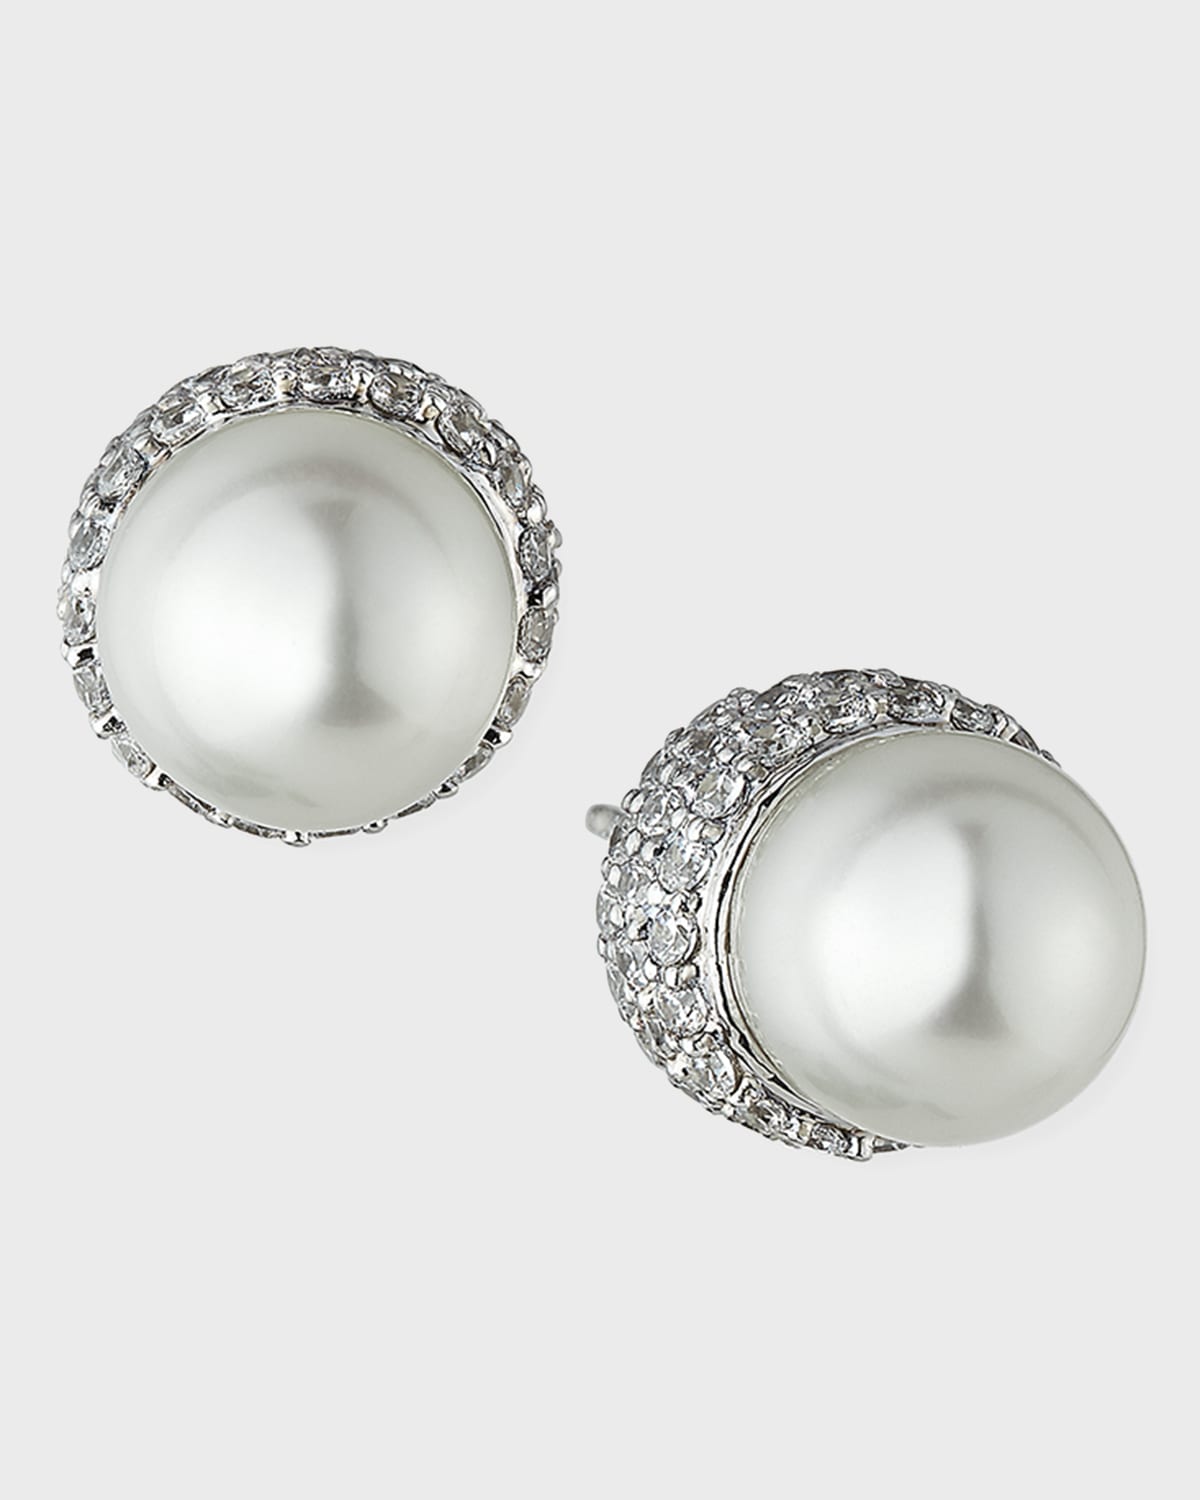 Fantasia by DeSerio 9mm Pave Pearly Stud Earrings